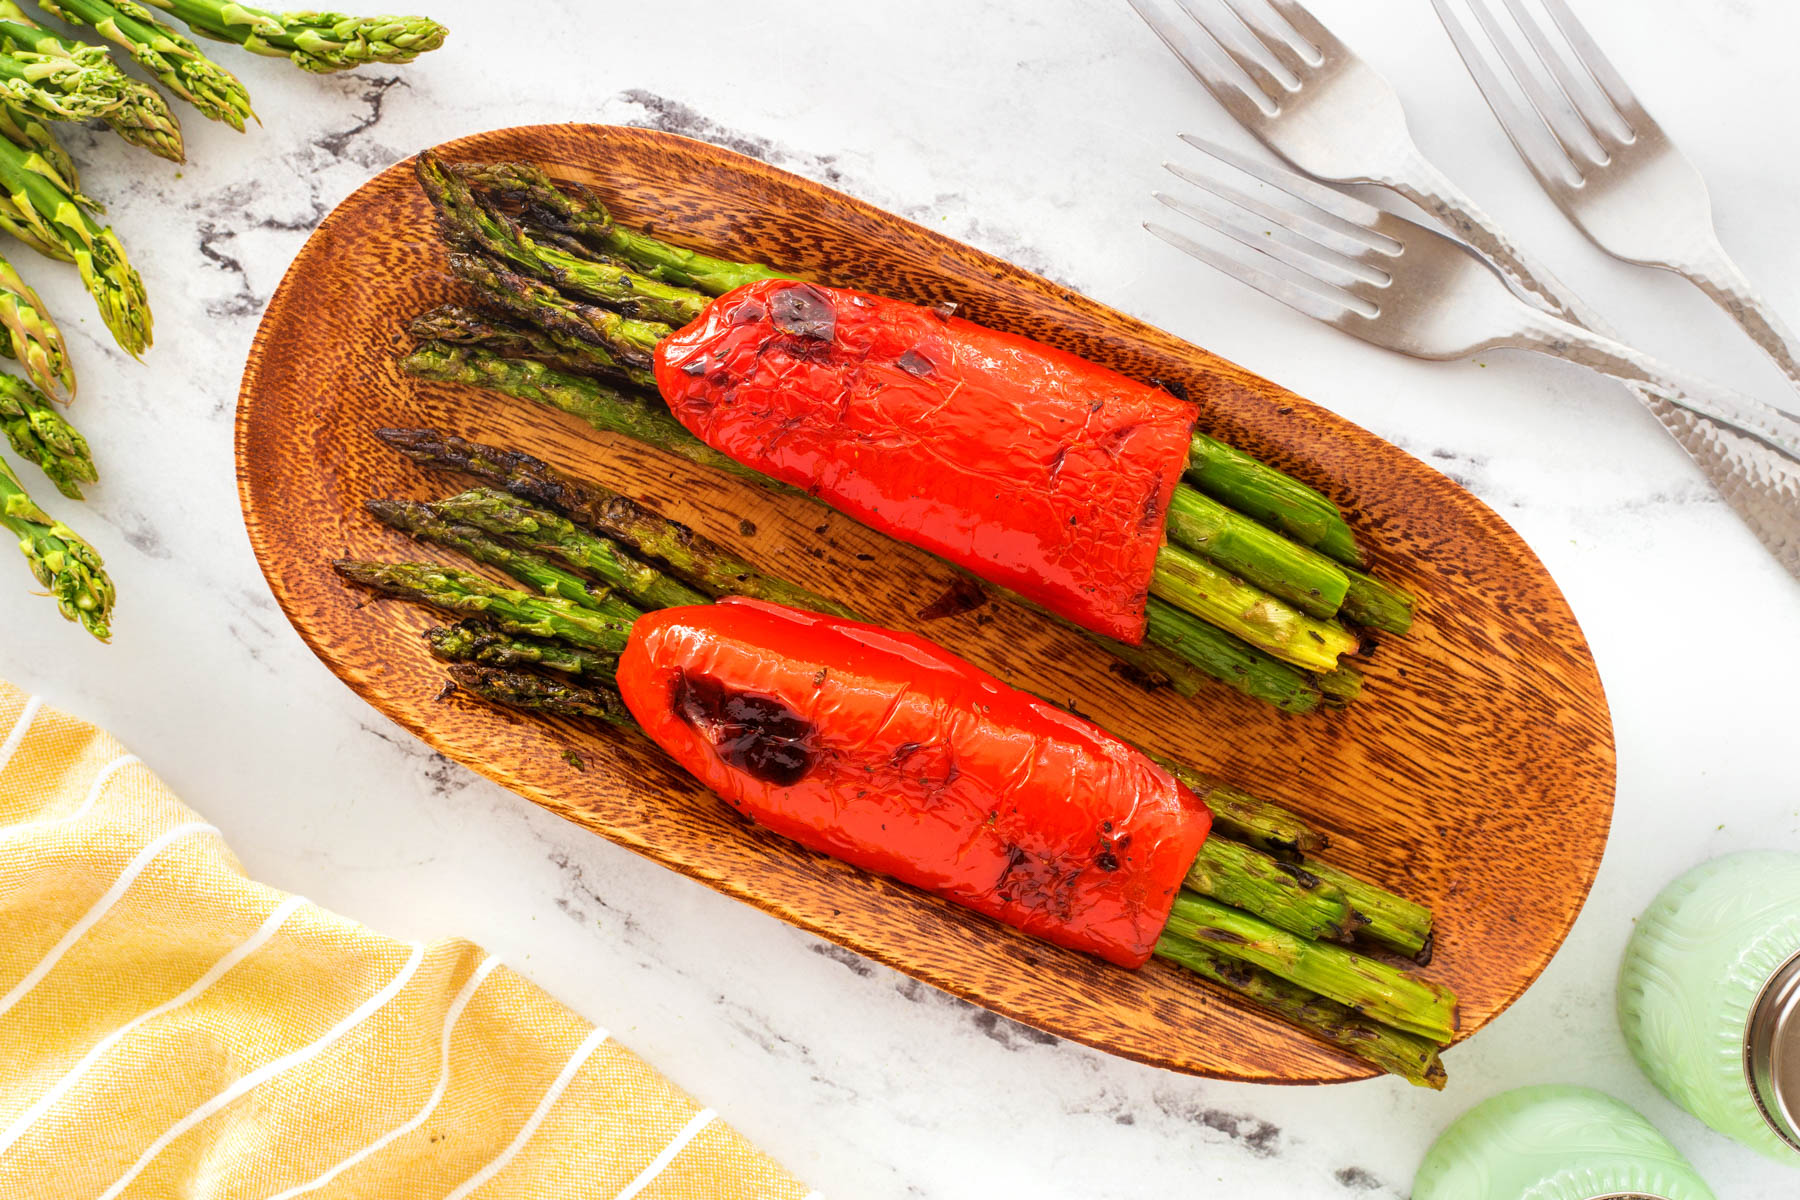 Grilled asparagus bundles on a wooden cutting board with some forks beside the board.